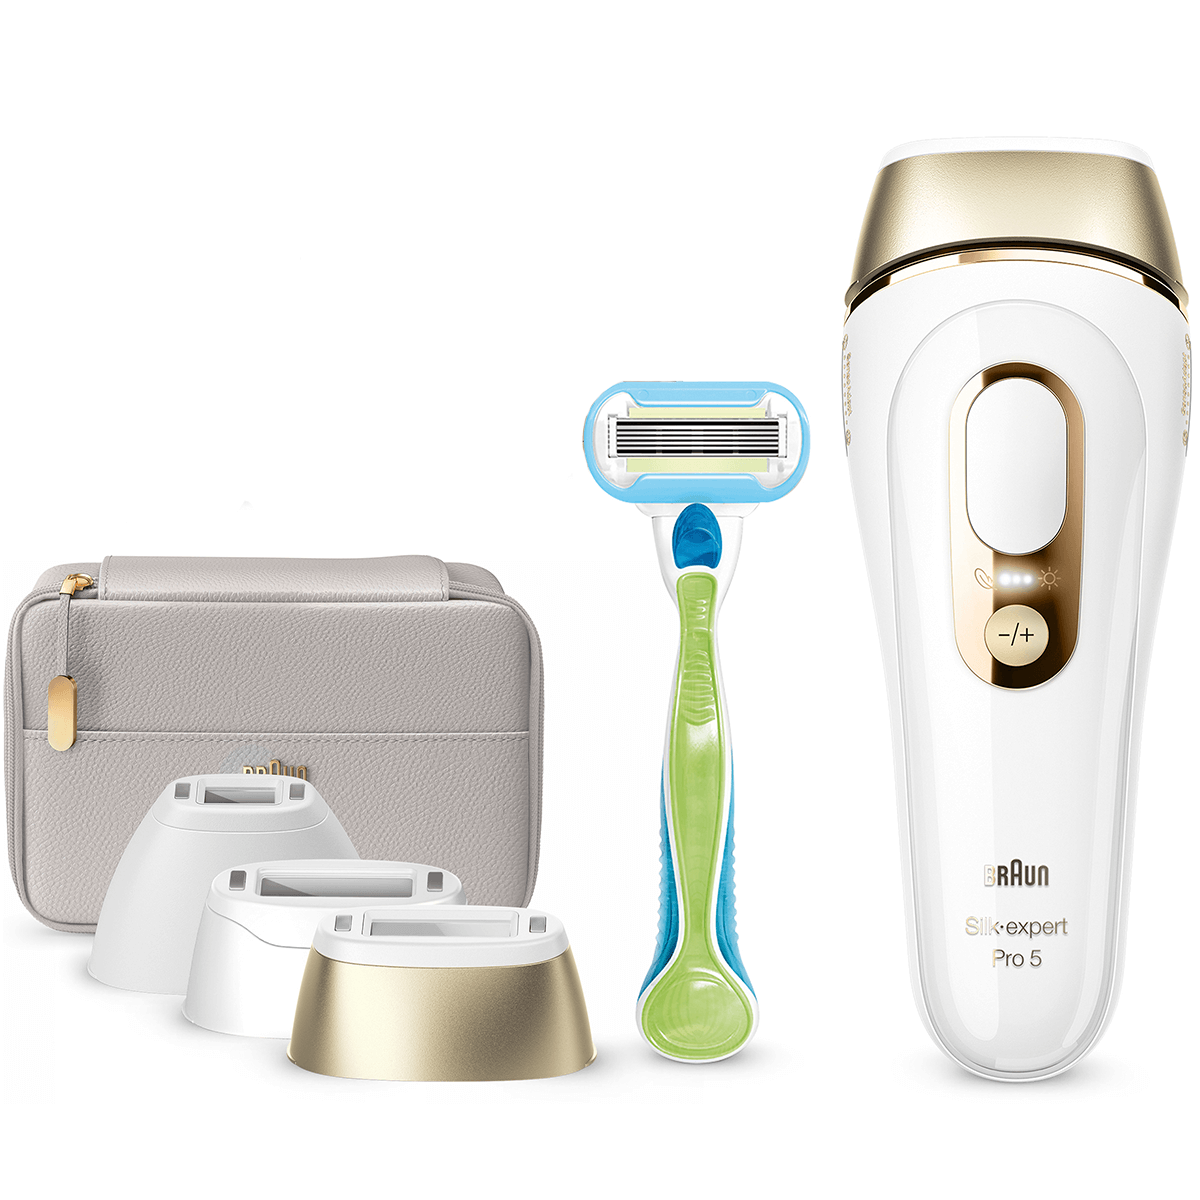 Braun Skin i·expert Smart IPL: At Home Alternative to Laser Hair Removal  with 3 Caps and Leather Pouch, PL7243